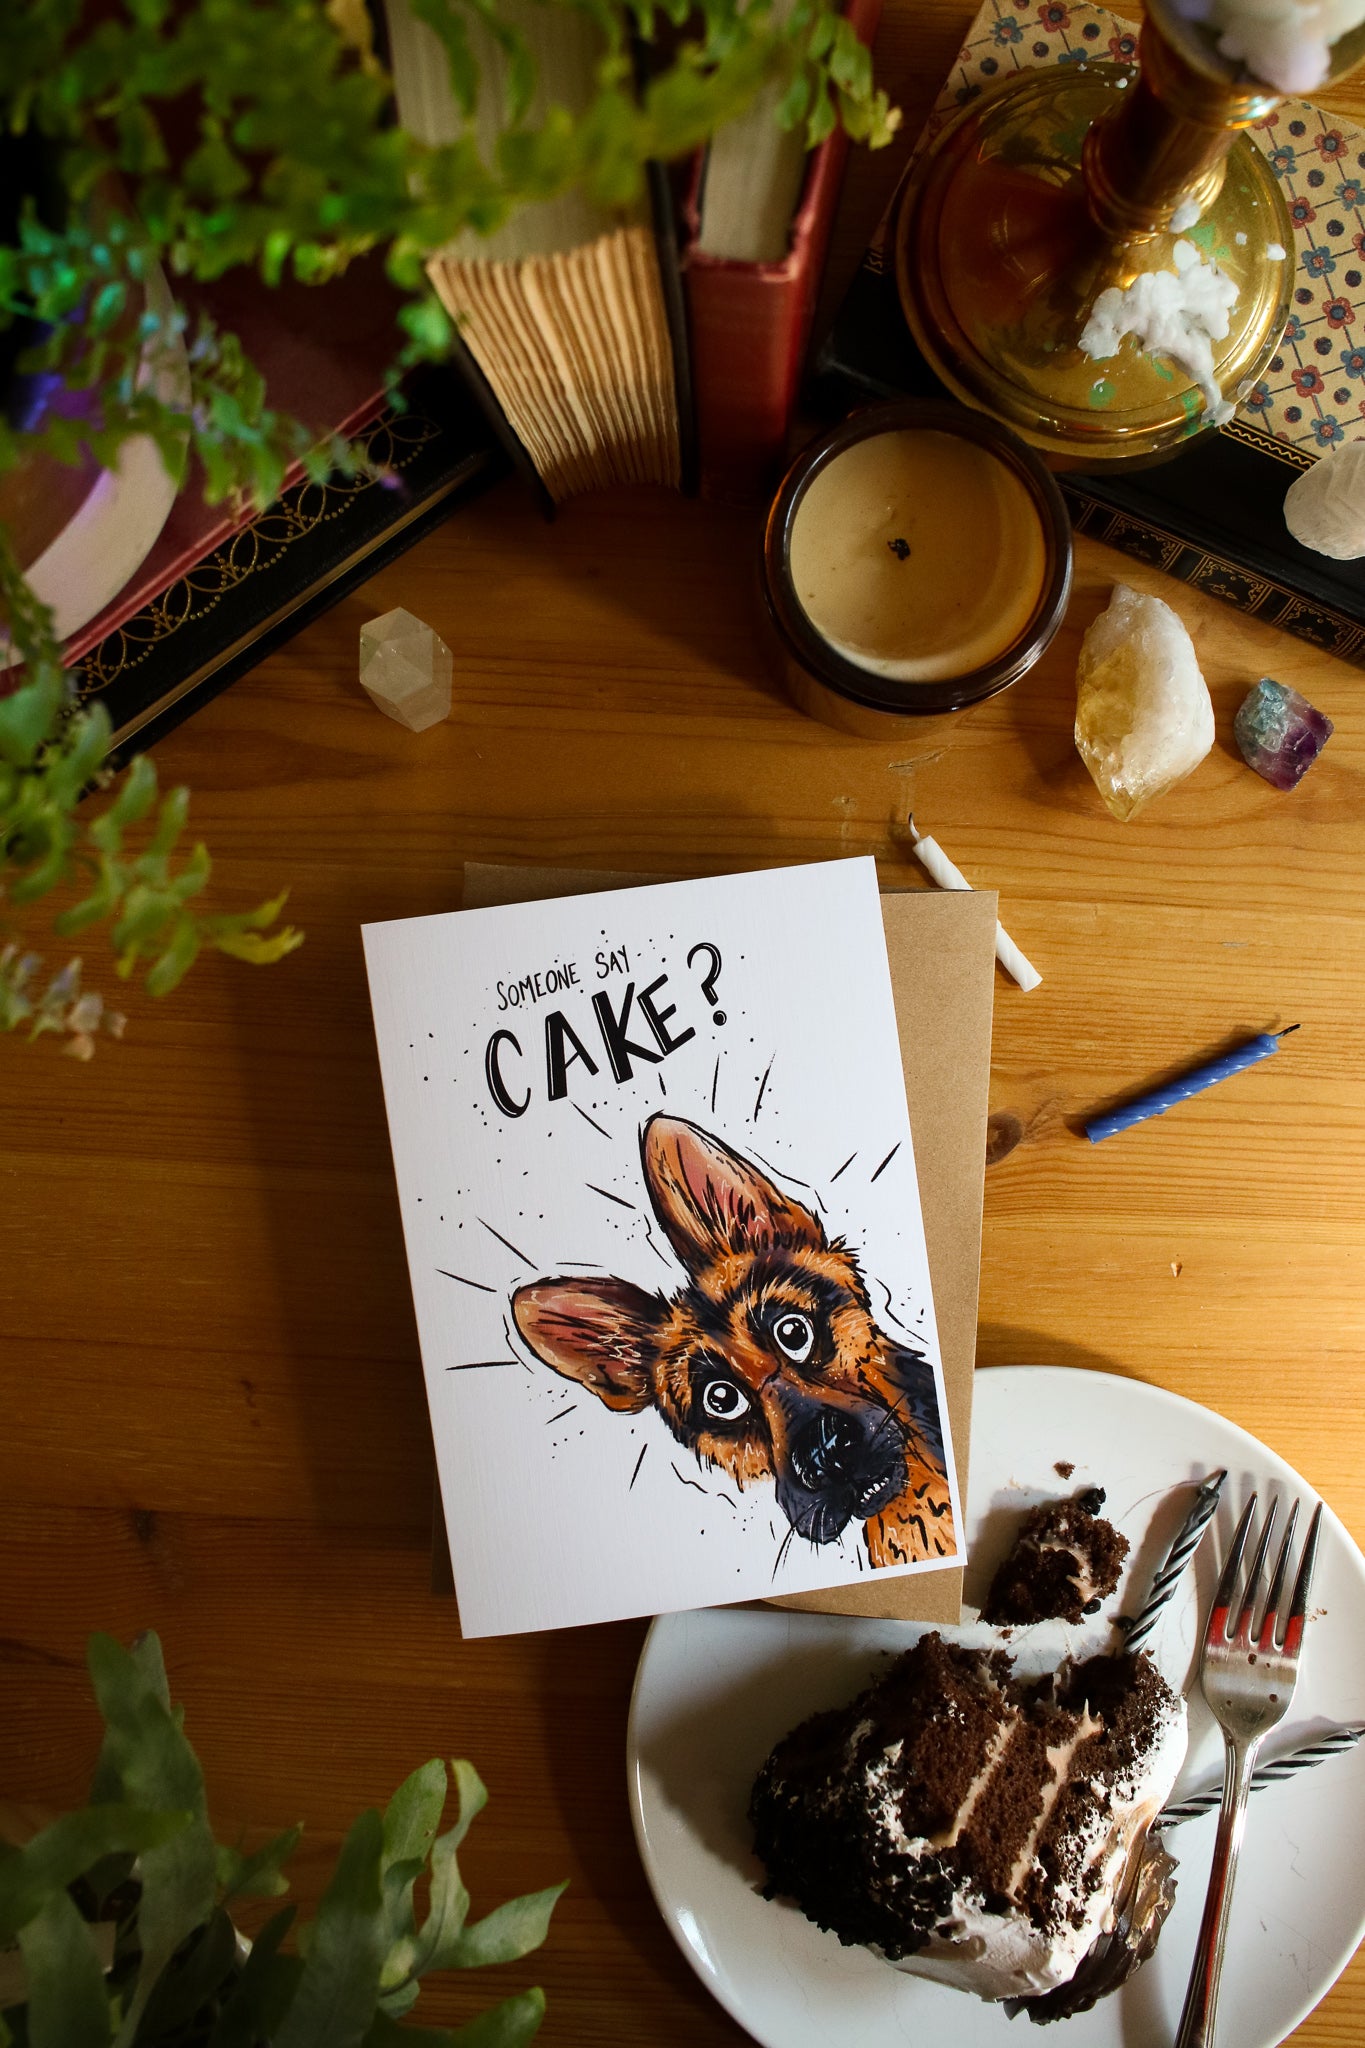 Where's the Cake?! - Greeting Card